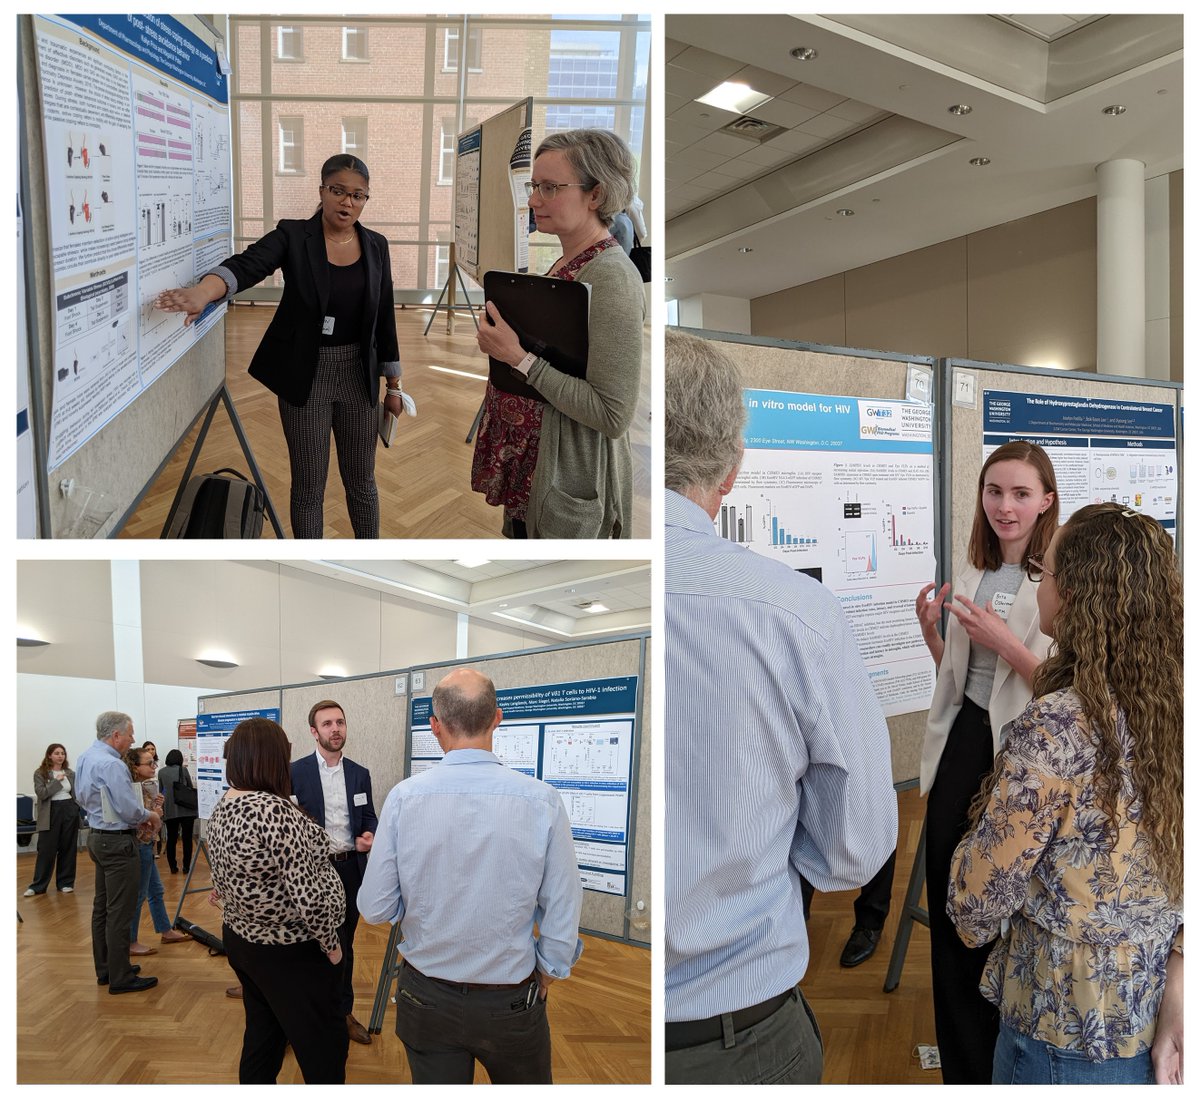 Looking forward to seeing everyone at our epic @GWSMHS Research Showcase this Thurs 4/25! #GWIBS PhD student posters 9:00-11:30am, keynote with Dr. Omaida Velzaquez at noon, and awards ceremony at 1:30pm! bit.ly/3dGWuYD